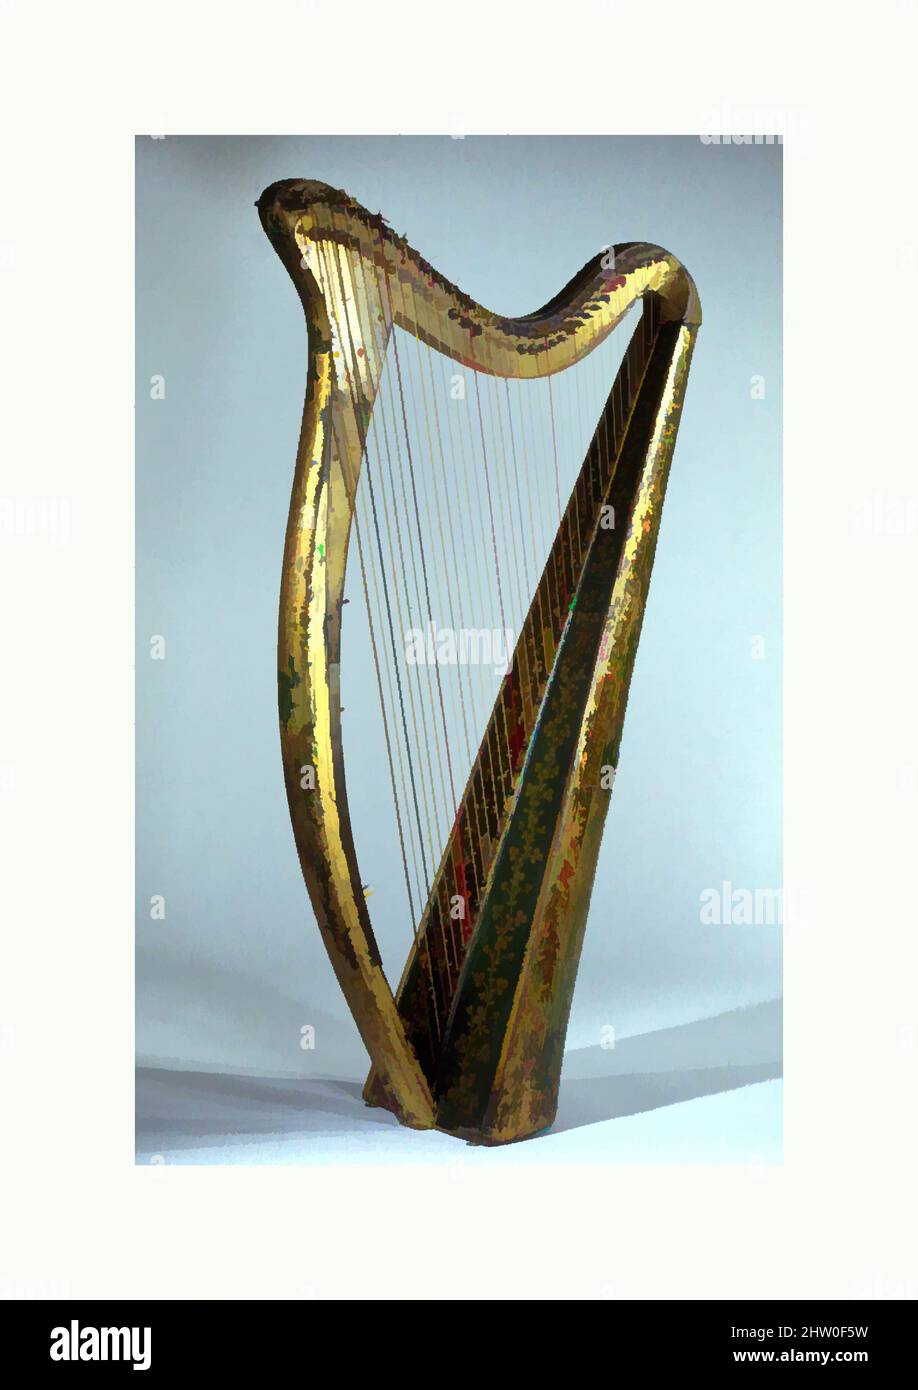 Art inspired by Portable Harp, 1819, Dublin, Ireland, Irish, Wood, various materials, Height: extreme 91.0 cm., Length of pillar 87.0 cm., Soundboard: resonating length 82.6 cm., greatest width 21.2 cm.;, Chordophone-Harp, John Egan (active ca. 1804–1841, Classic works modernized by Artotop with a splash of modernity. Shapes, color and value, eye-catching visual impact on art. Emotions through freedom of artworks in a contemporary way. A timeless message pursuing a wildly creative new direction. Artists turning to the digital medium and creating the Artotop NFT Stock Photo